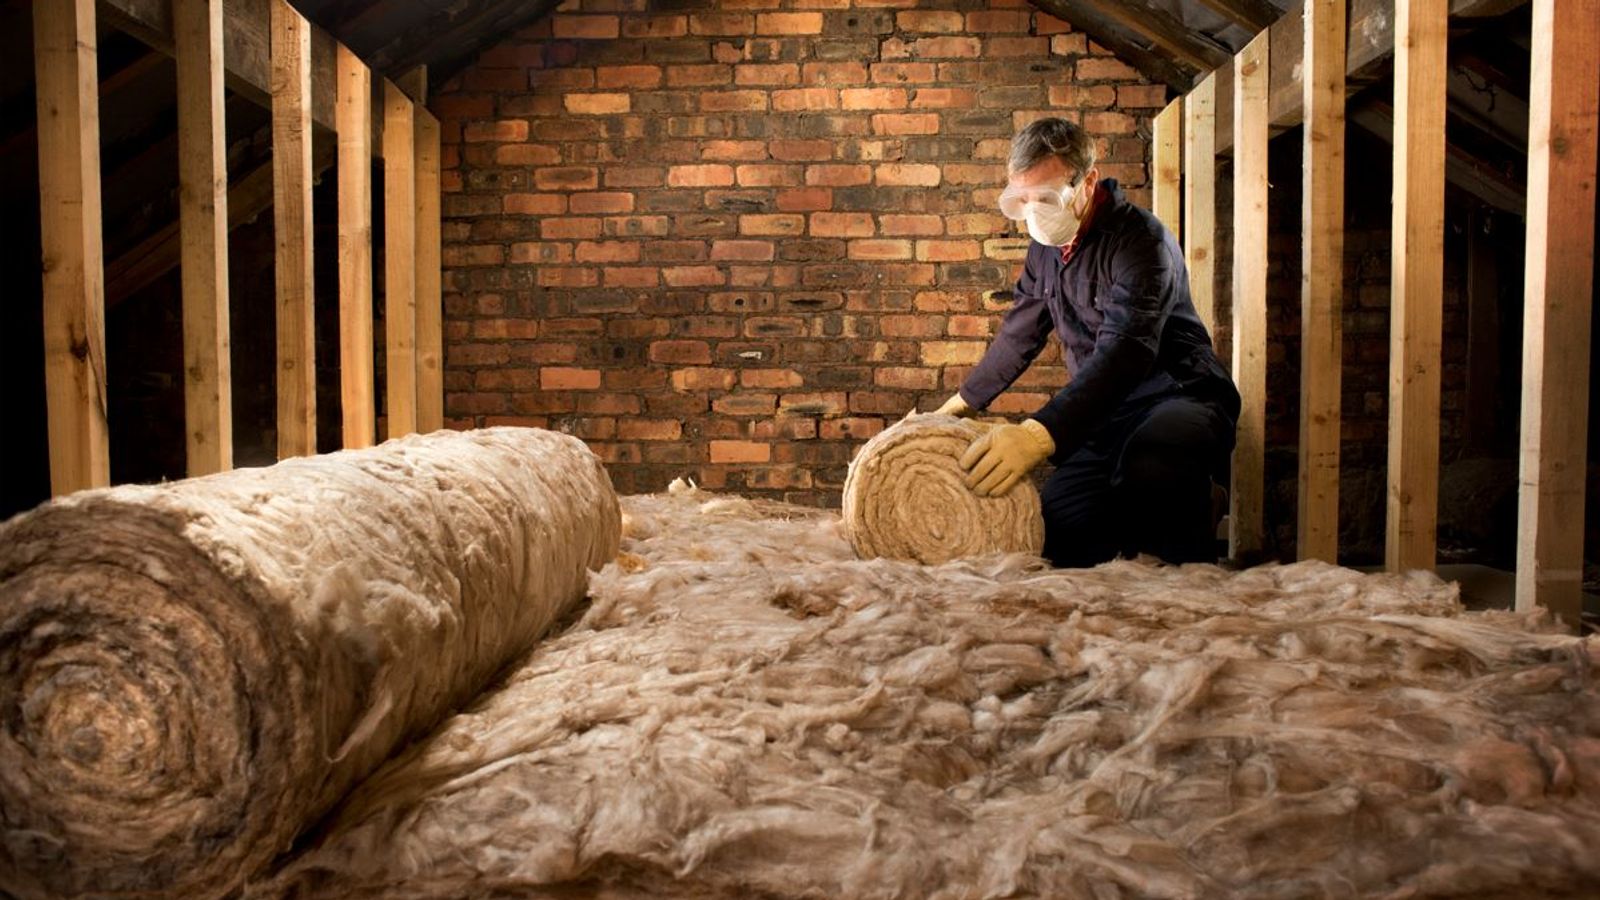 Better home insulation could mean people live longer, study suggests